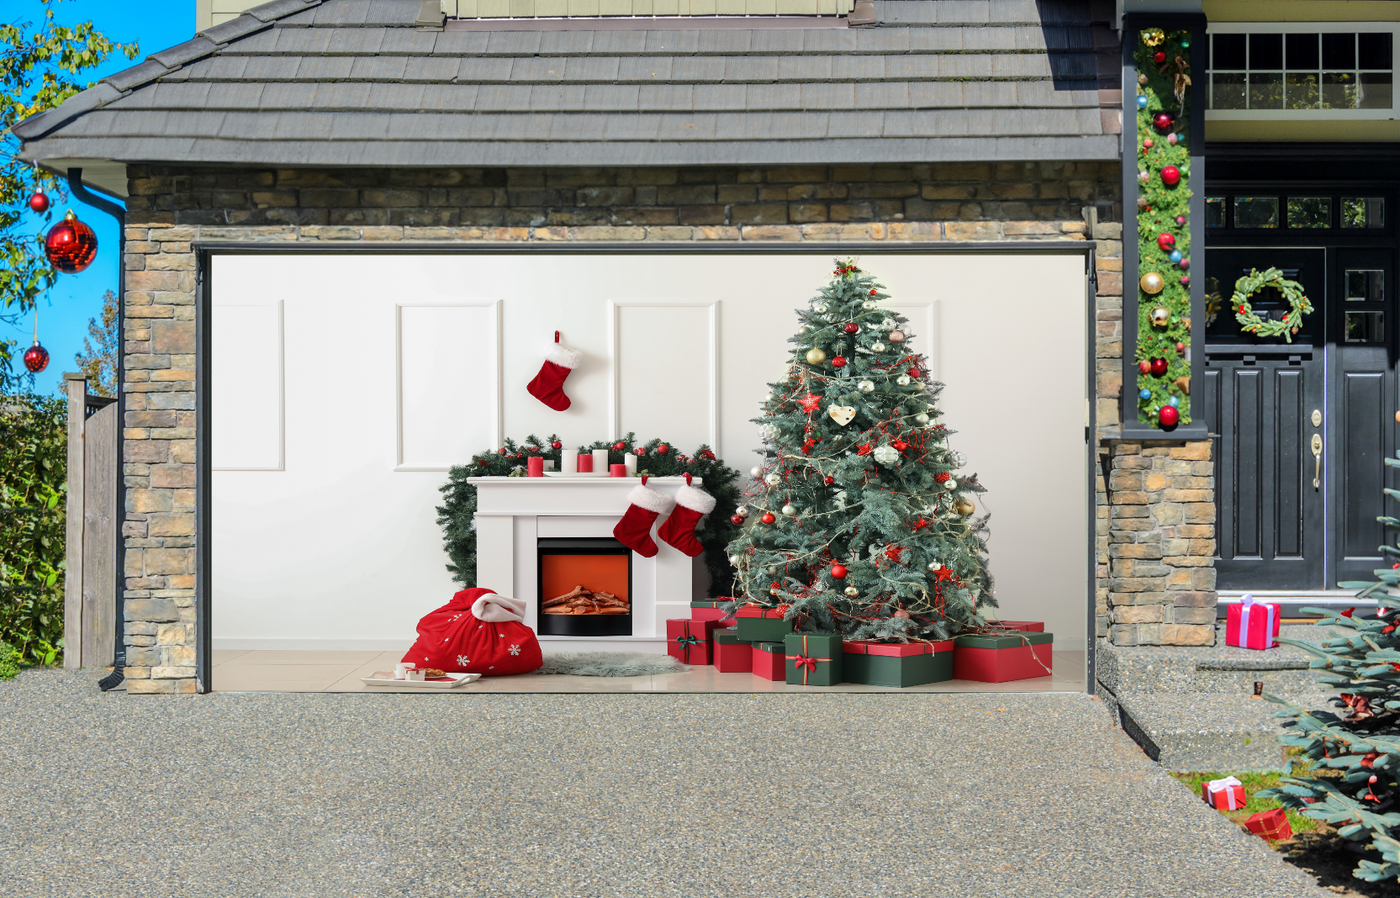 Interior of Light Living Room With Santa Bag, Fireplace And Christmas Tree Garage Door Cover Wrap Backdrop Decoration